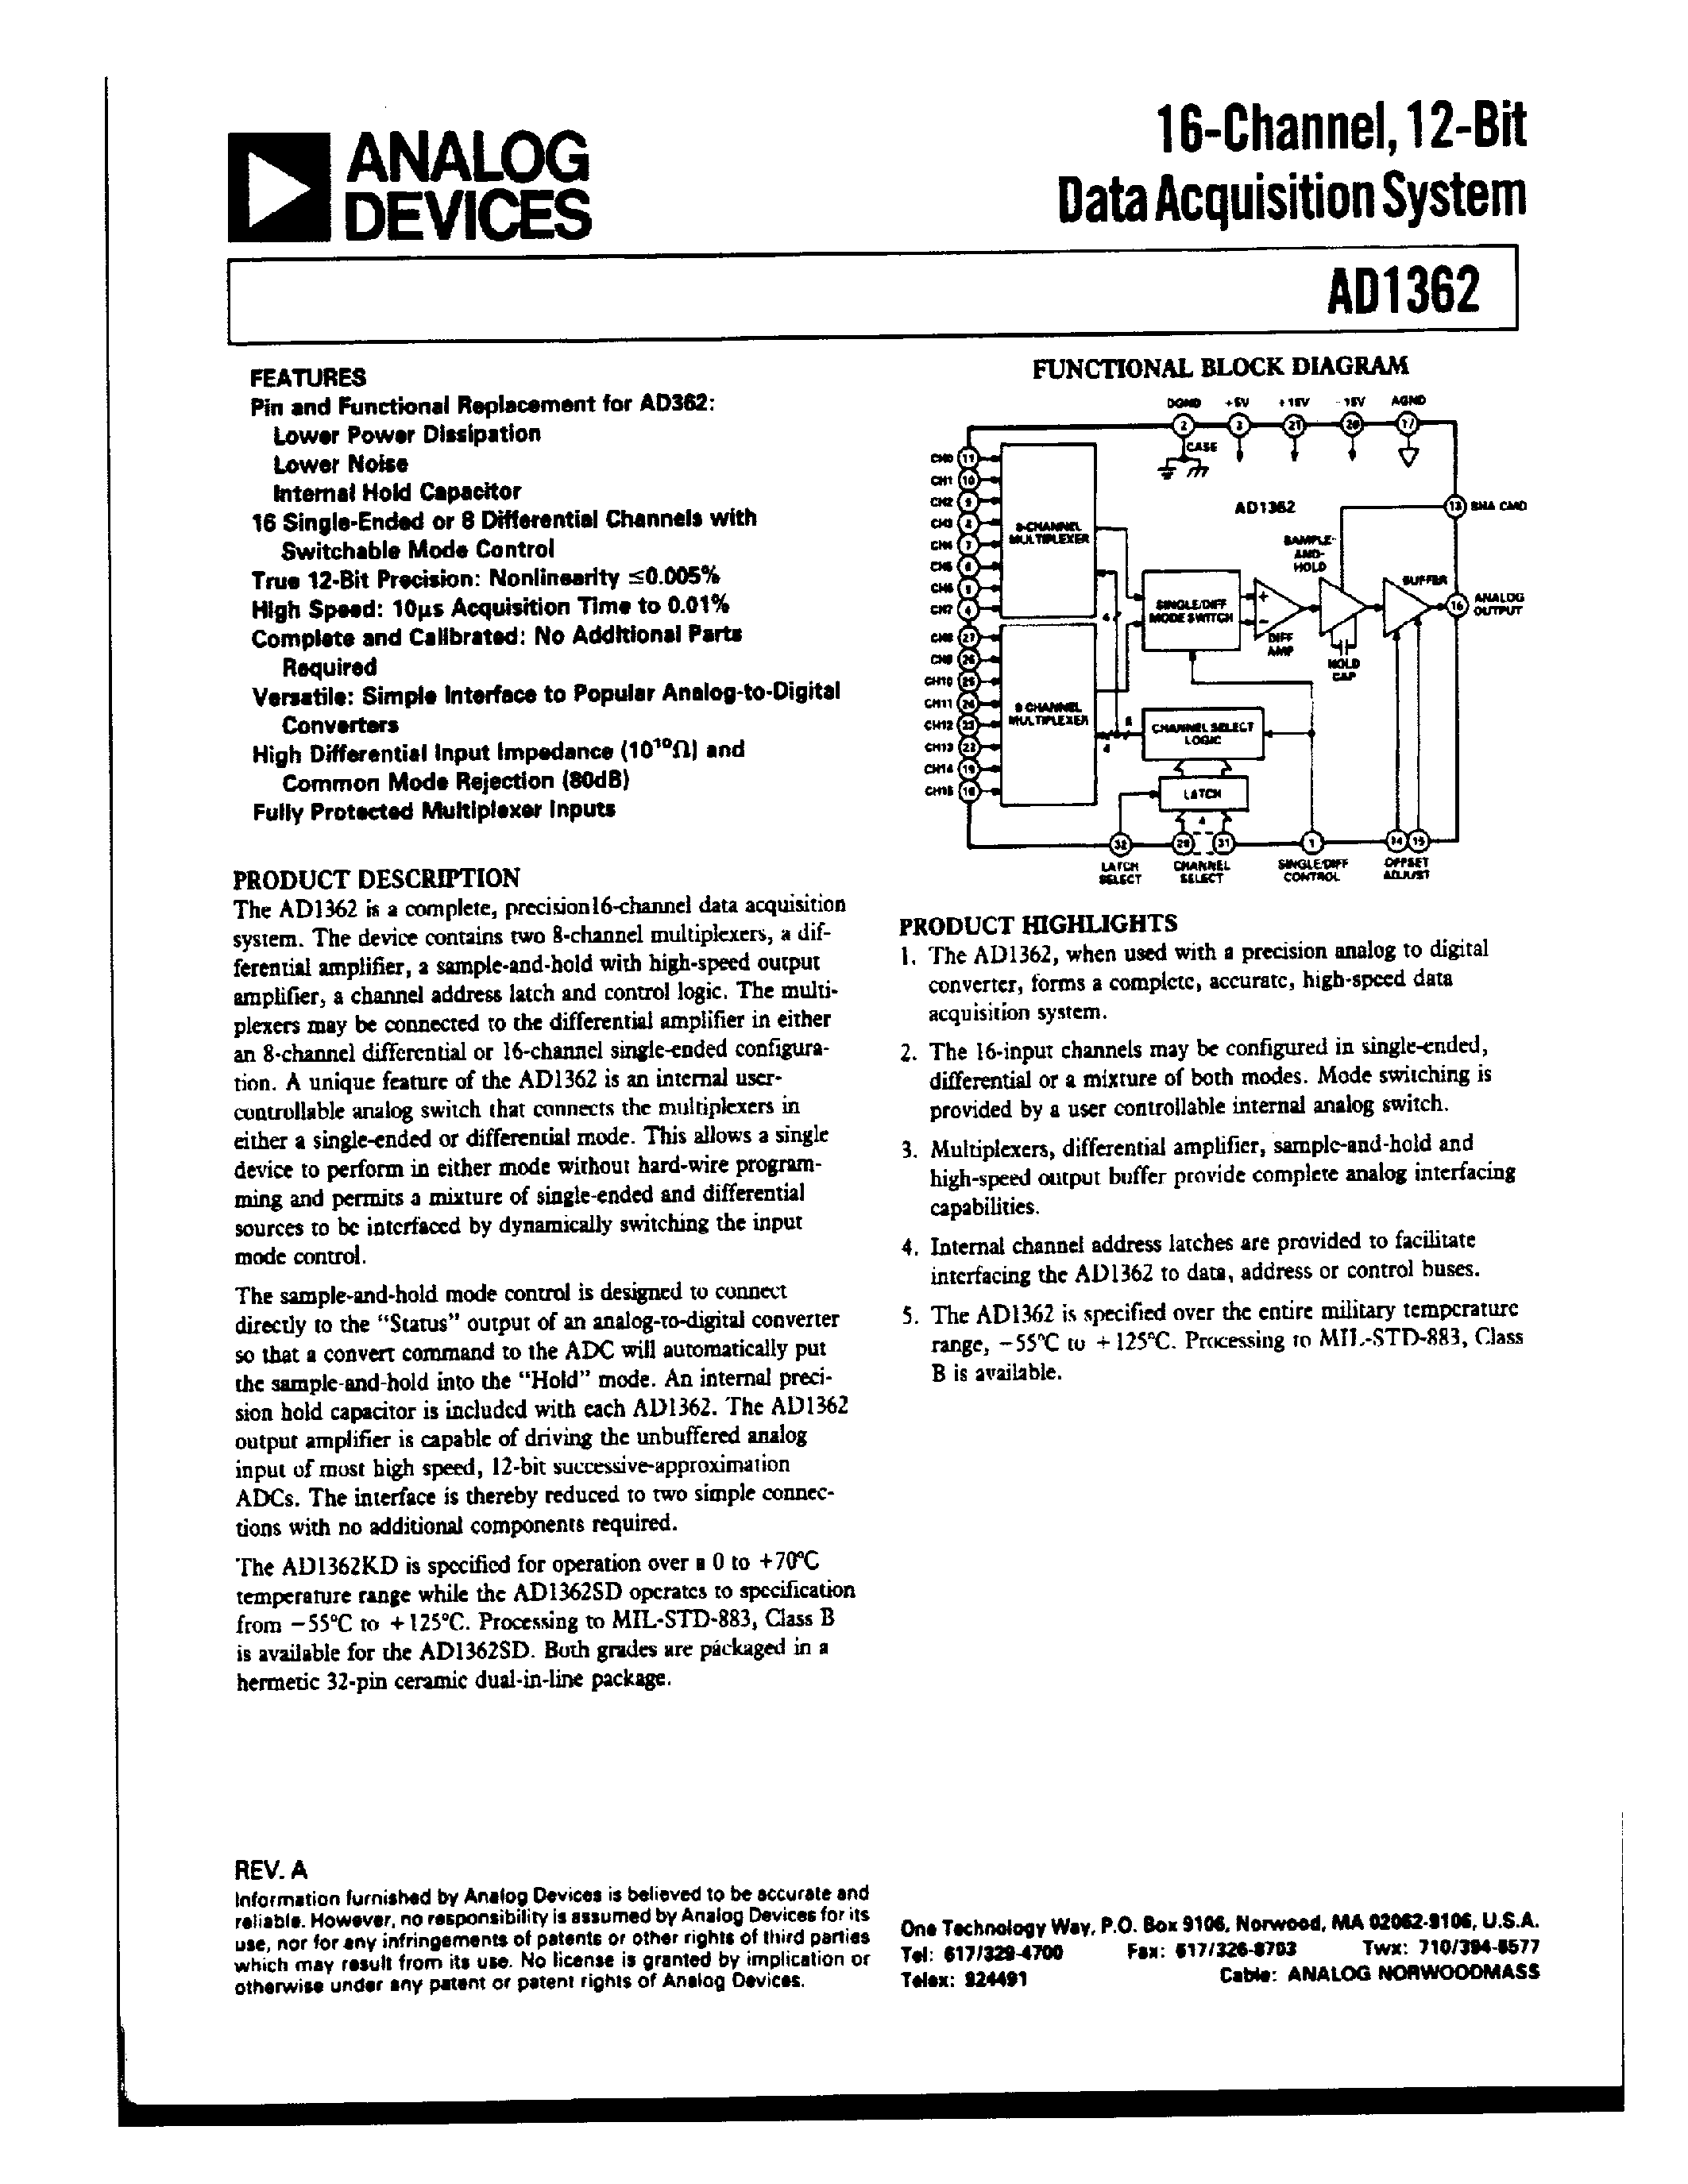 Datasheet AD1362KD - 16-Channel/12-Bit Data Acquisition System page 1